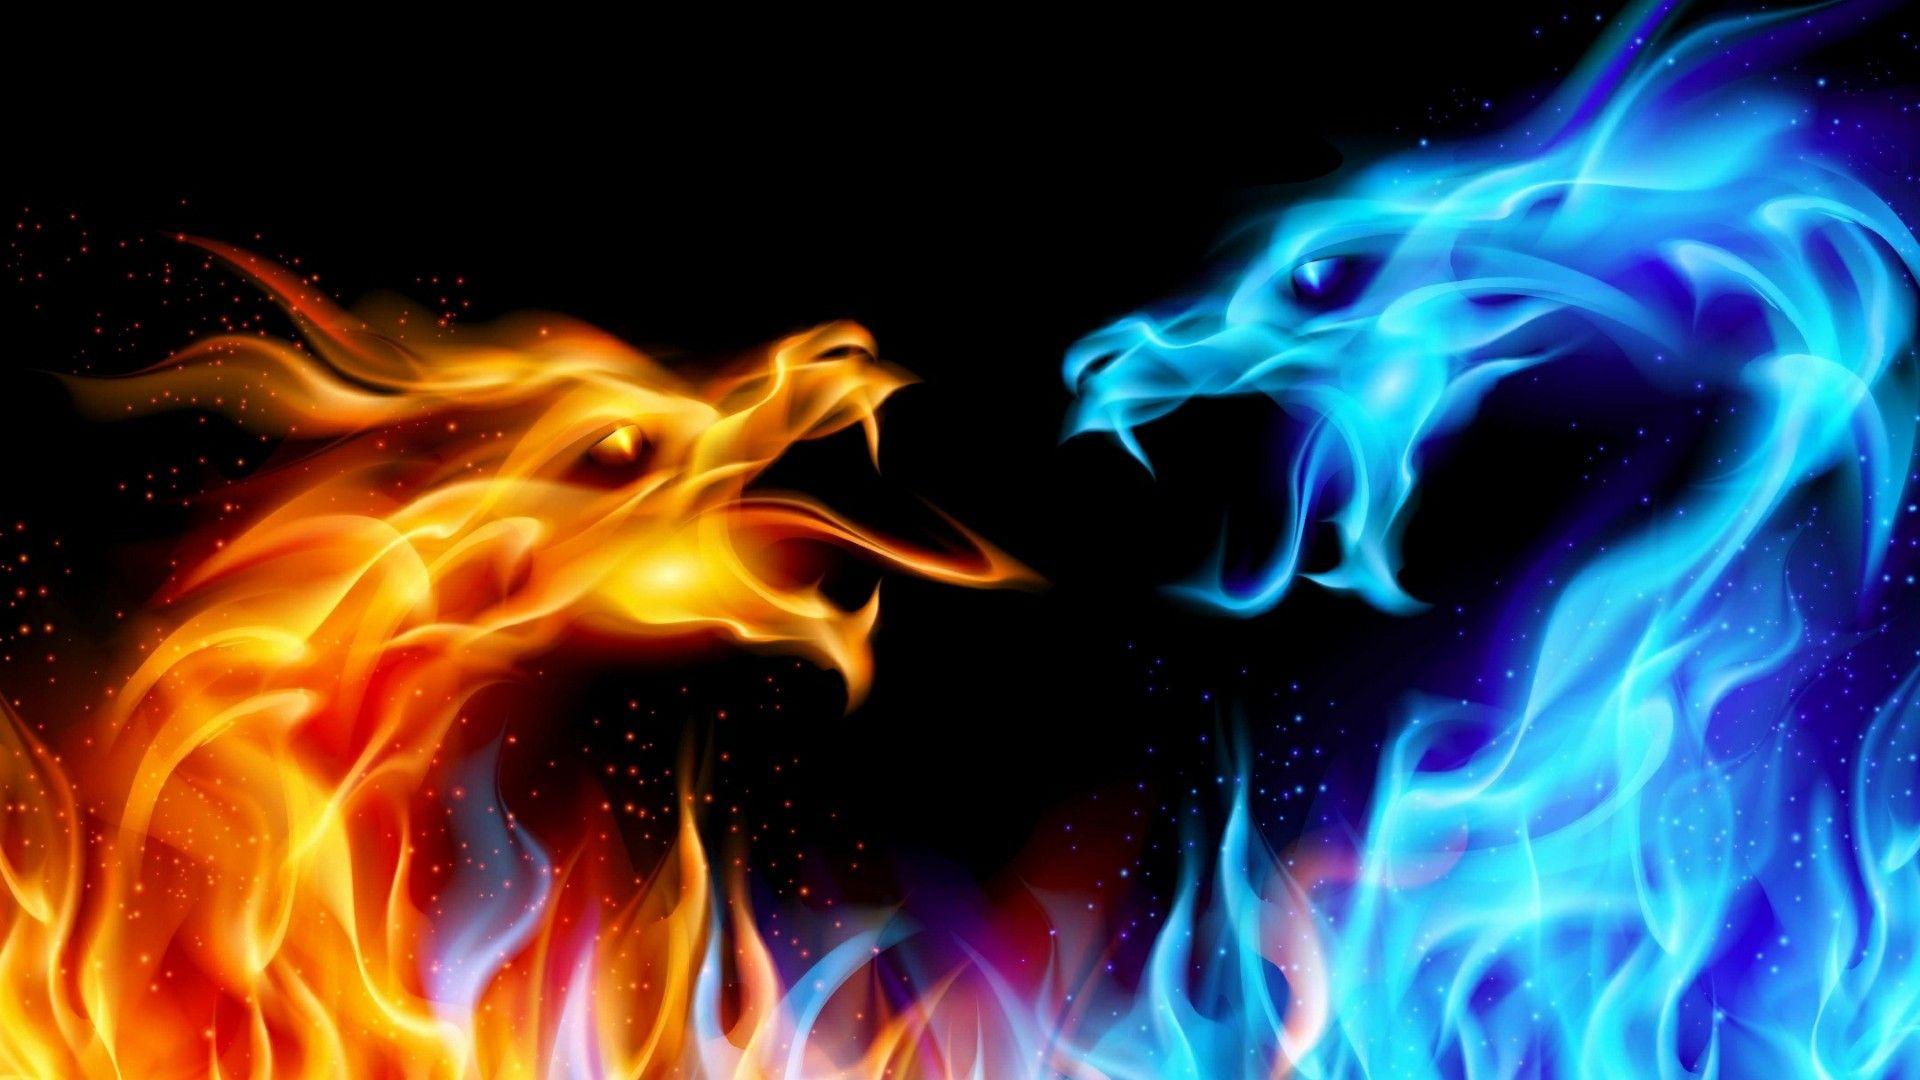 Fire And Ice Dragon Wallpapers - Wallpaper Cave.